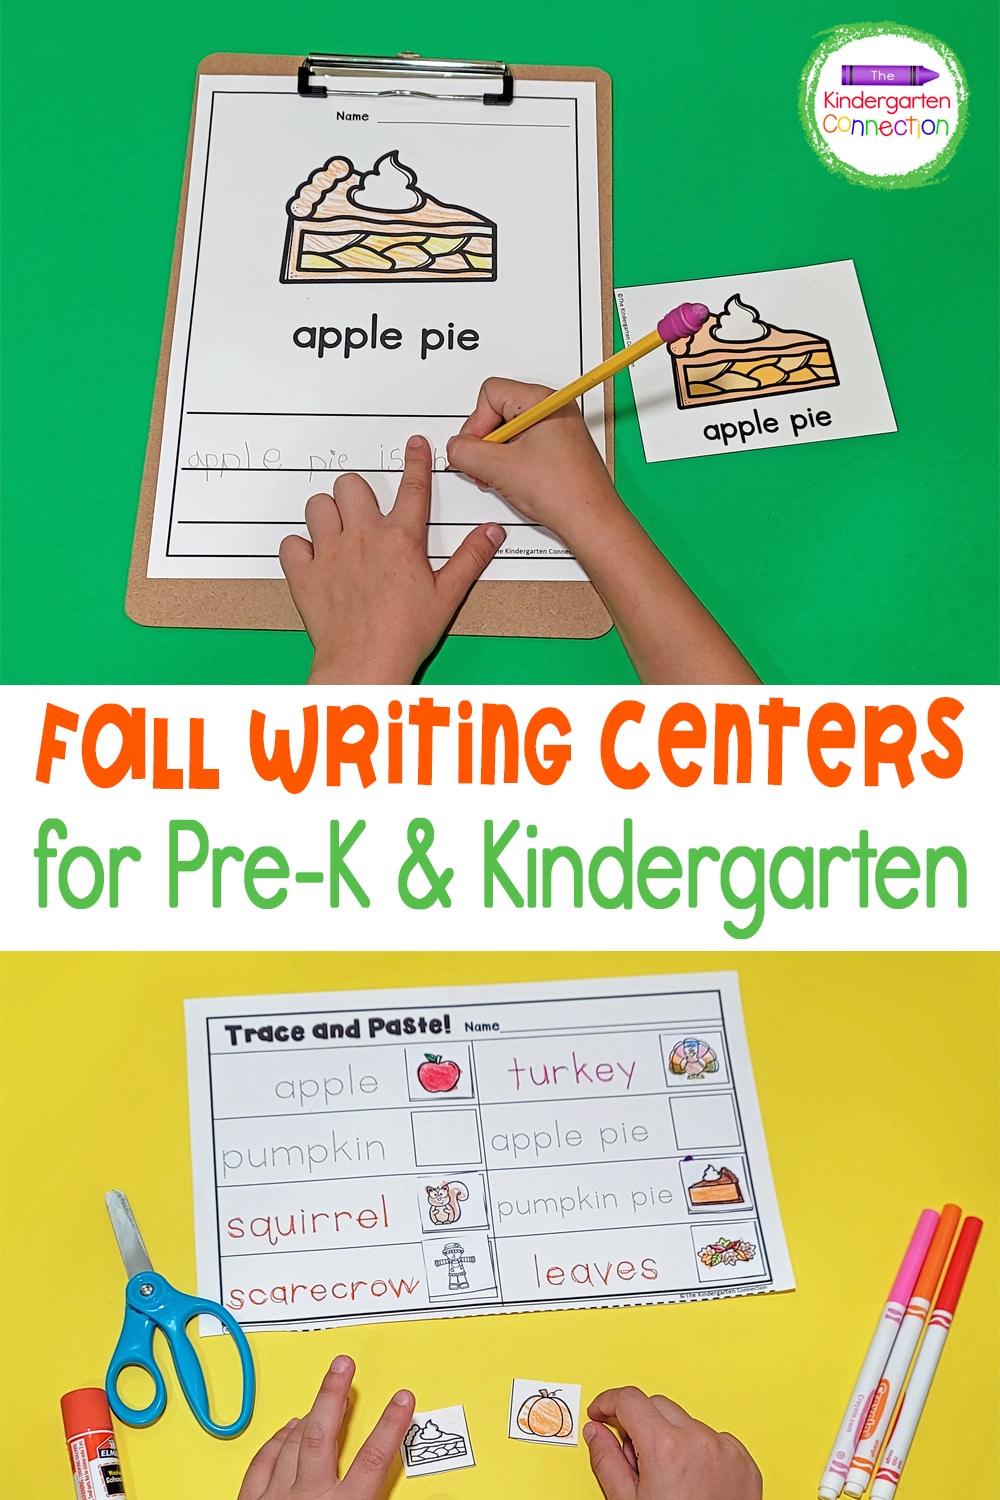 These Fall Writing Activities for Pre-K & Kindergarten are perfect for early writers to practice labeling, sentence writing, and more!